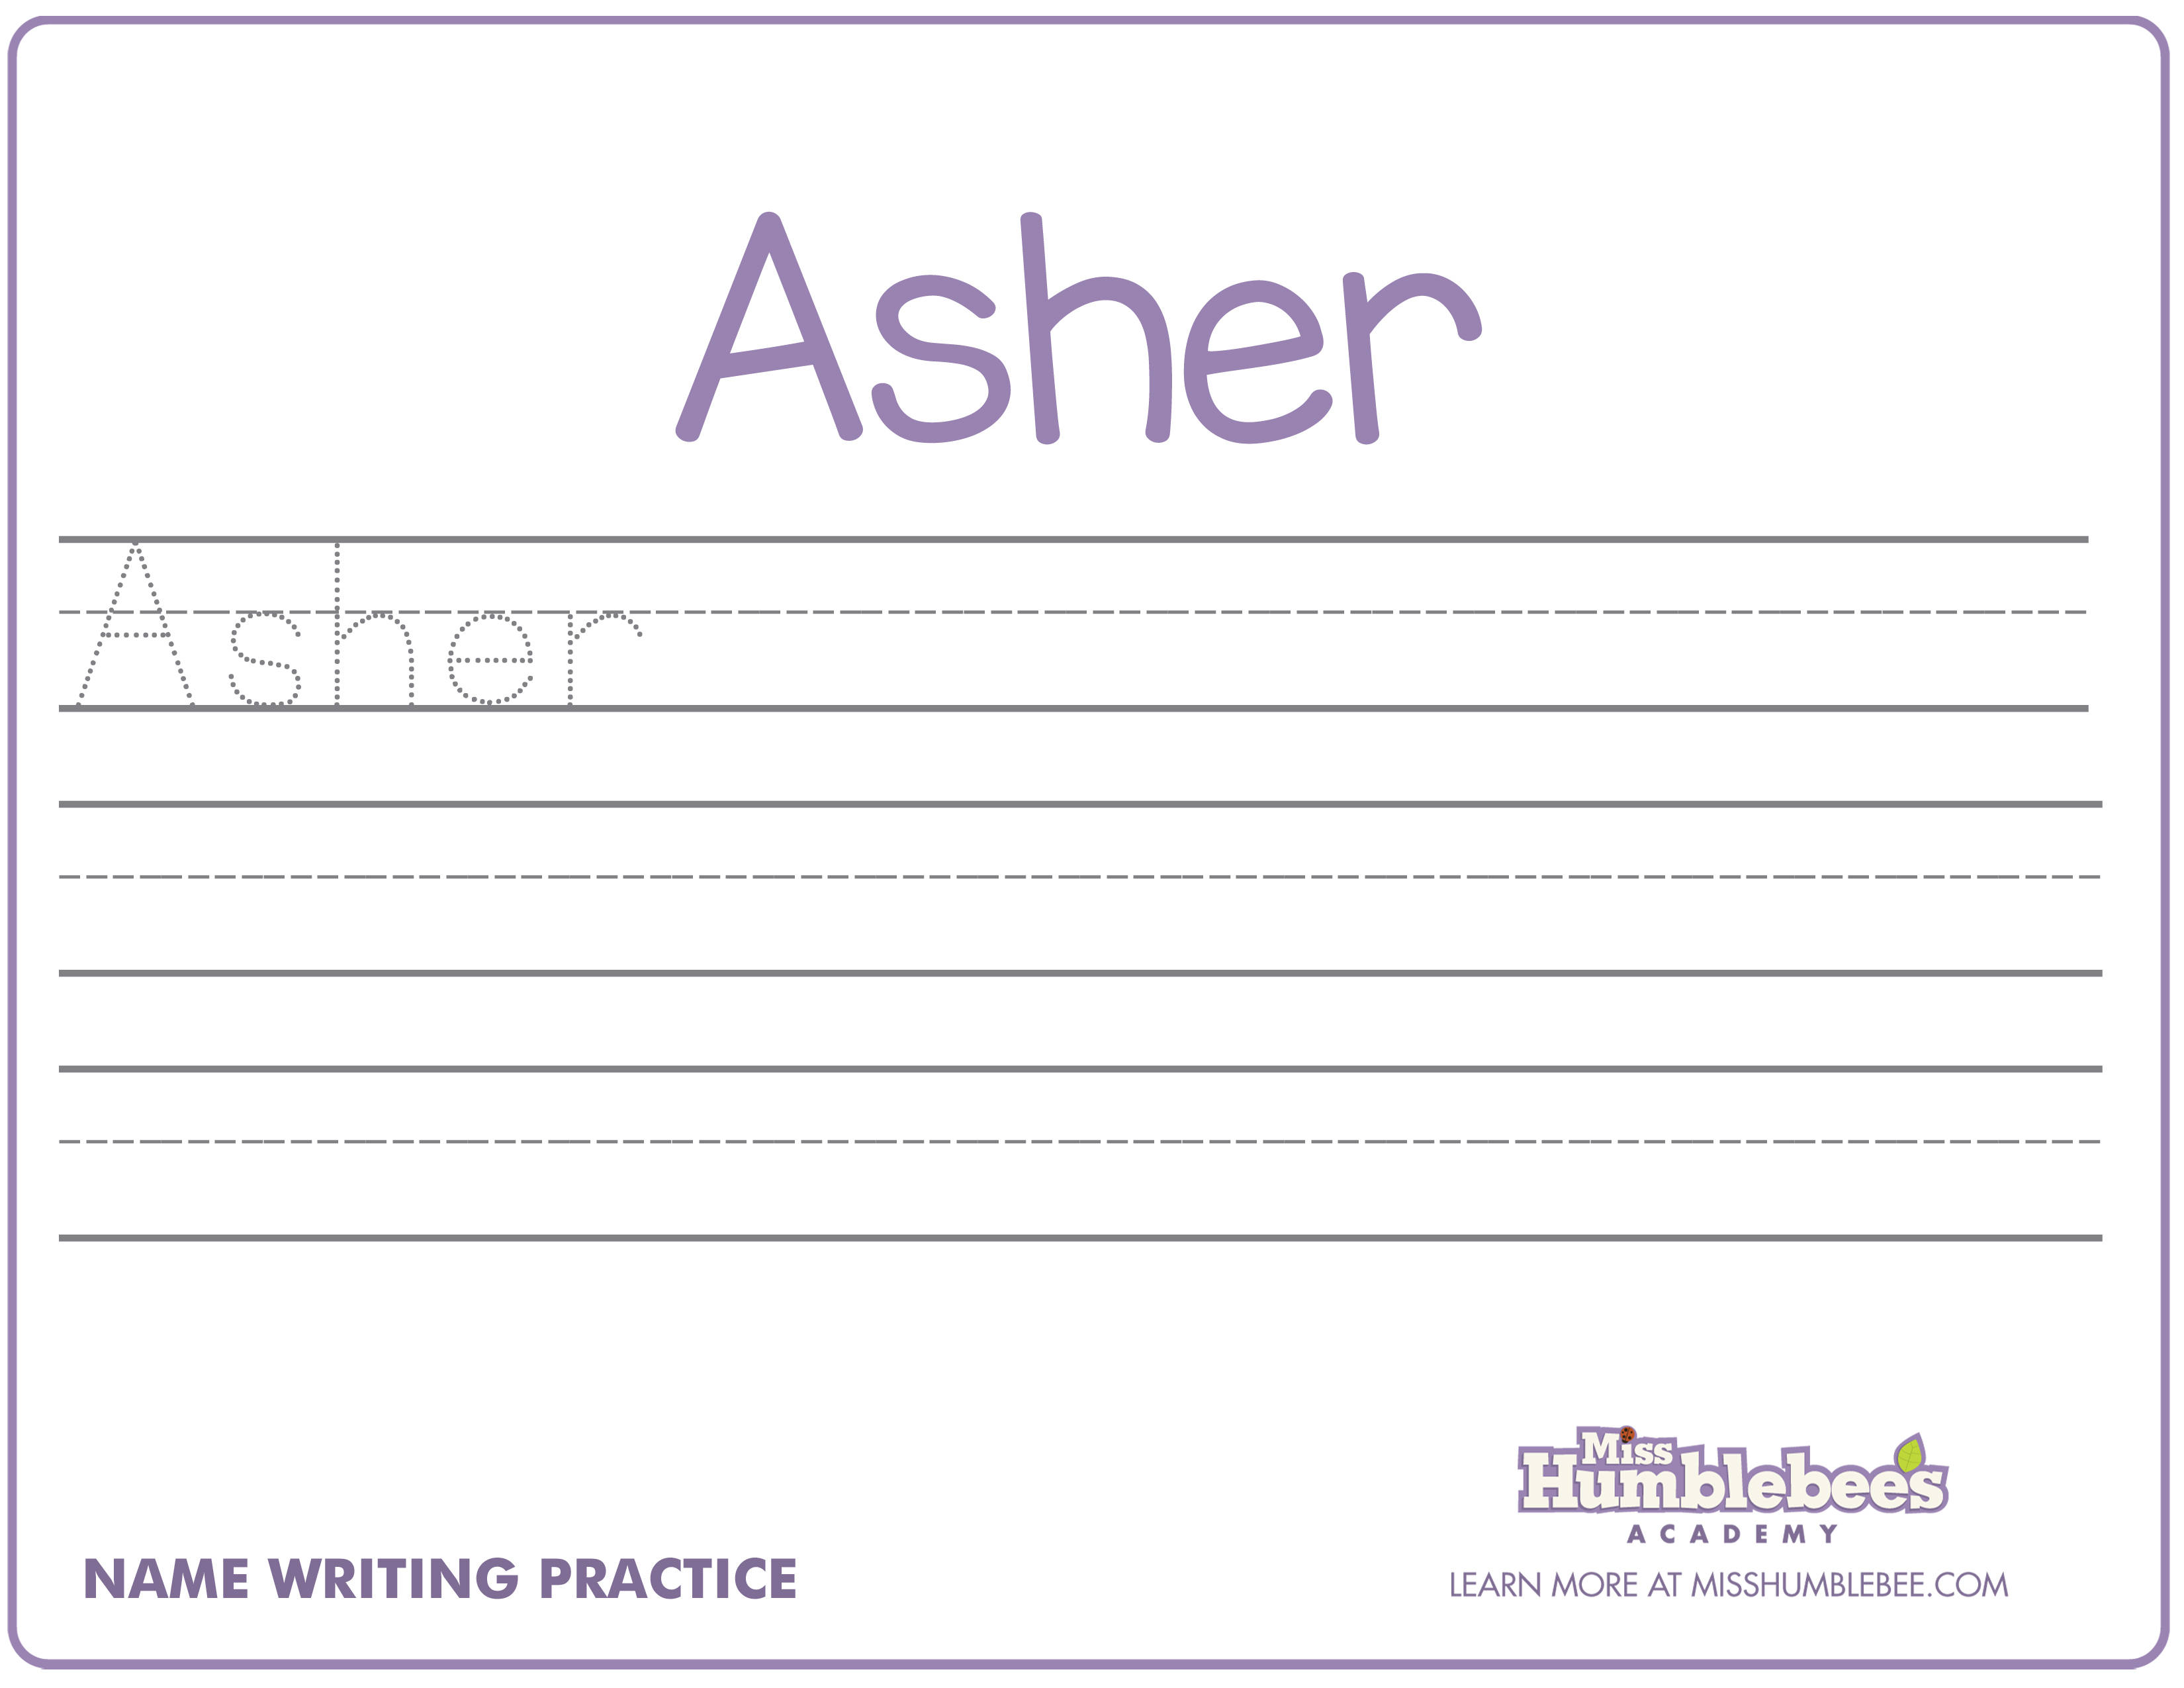 Does It Matter If A Child Is Left- Or Right-Handed? - Free Printable Practice Name Writing Sheets